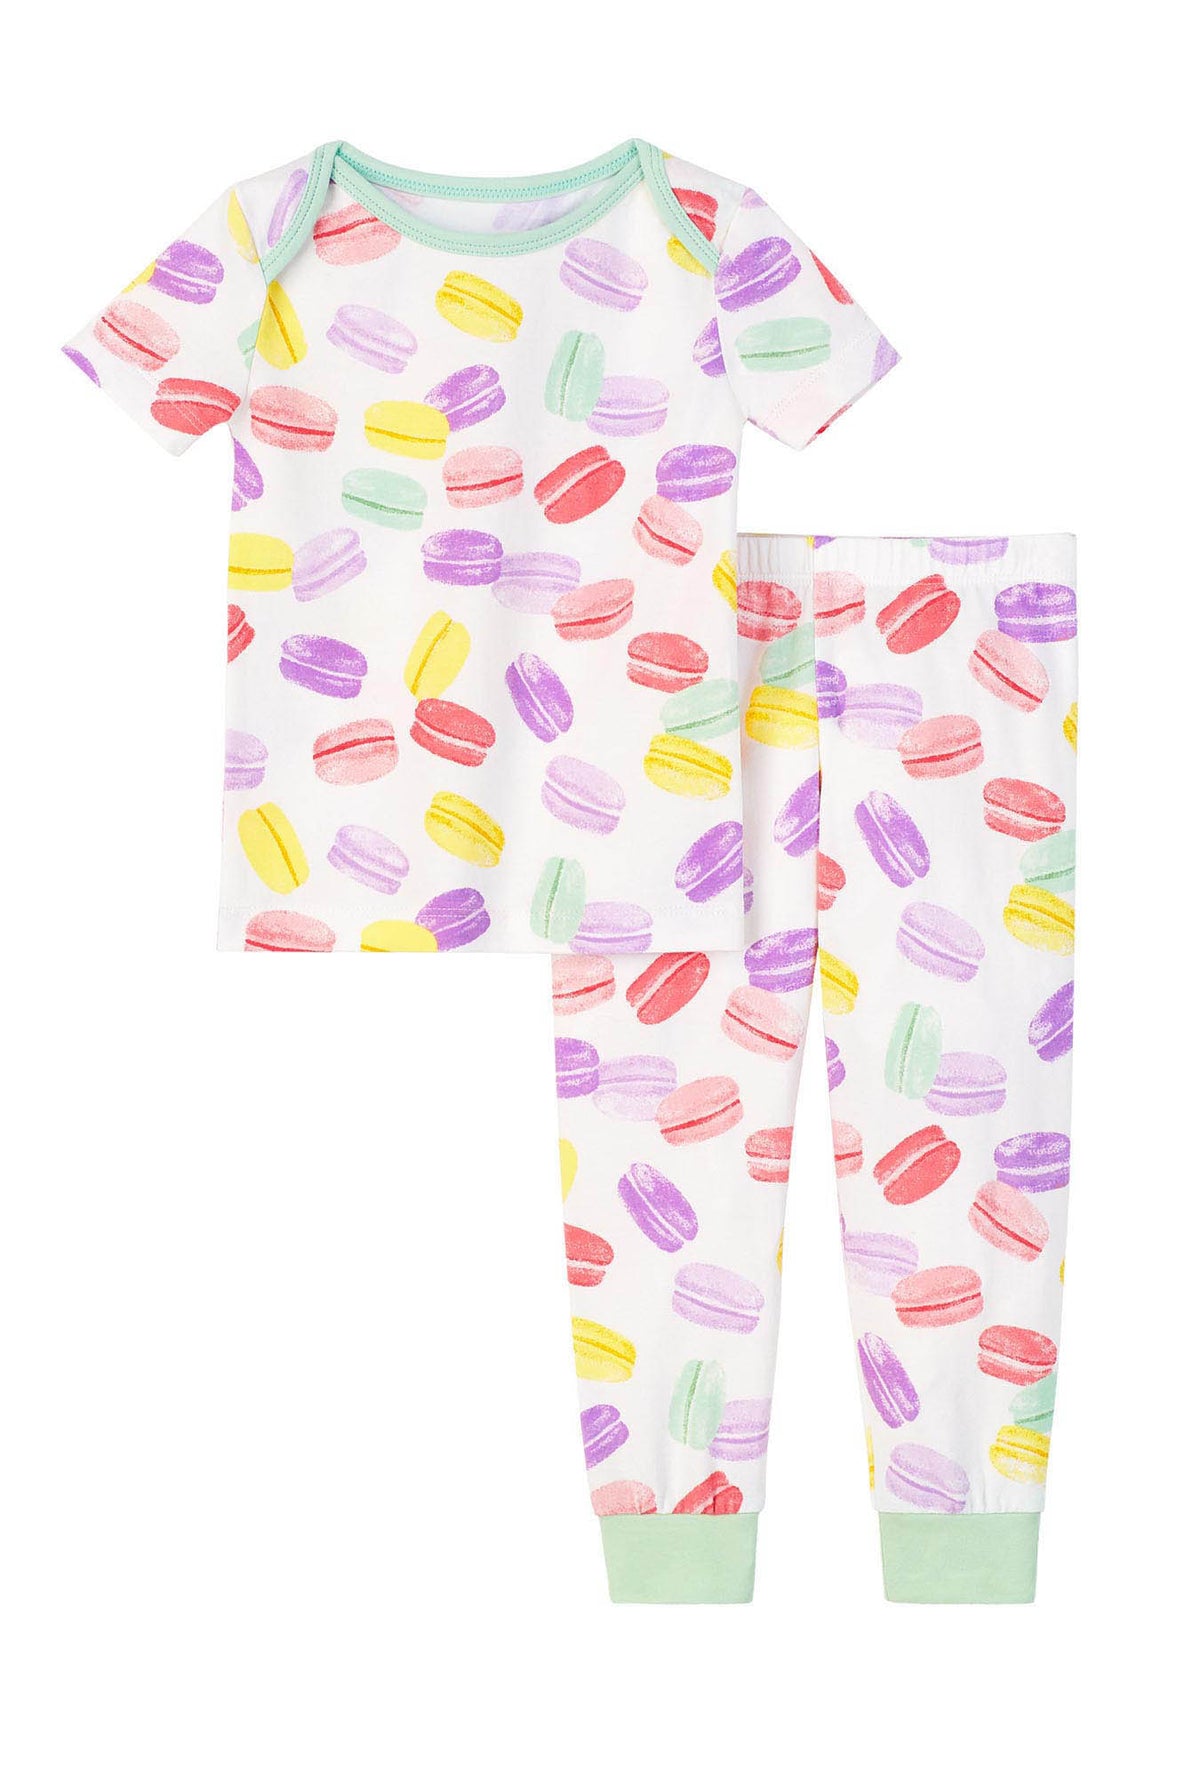   Short Sleeve Stretch Jersey Boo Boo PJ Set with Delice De Macarons print